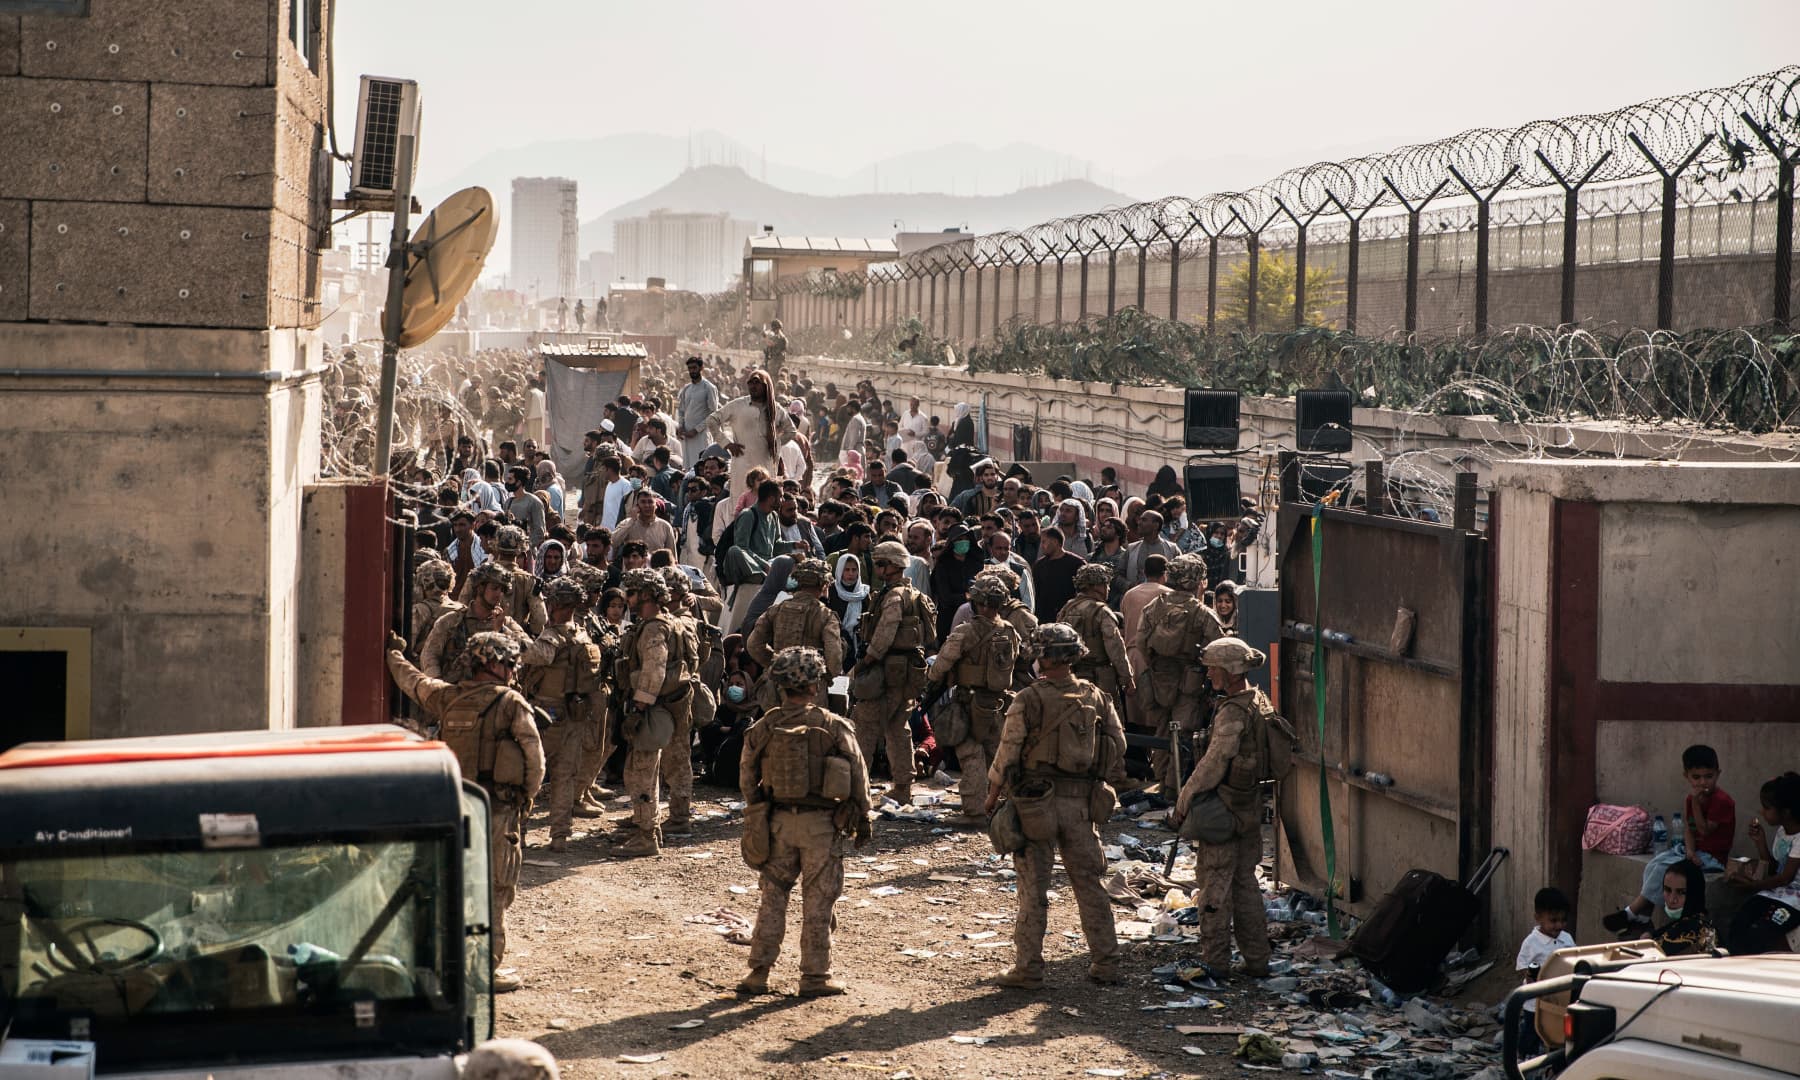 US Marines with Special Purpose Marine Air-Ground Task Force - Crisis Response - Central Command, provide assistance at an evacuation control checkpoint during an evacuation at Hamid Karzai International Airport in Kabul, Afghanistan on August 21, 2021. — AP